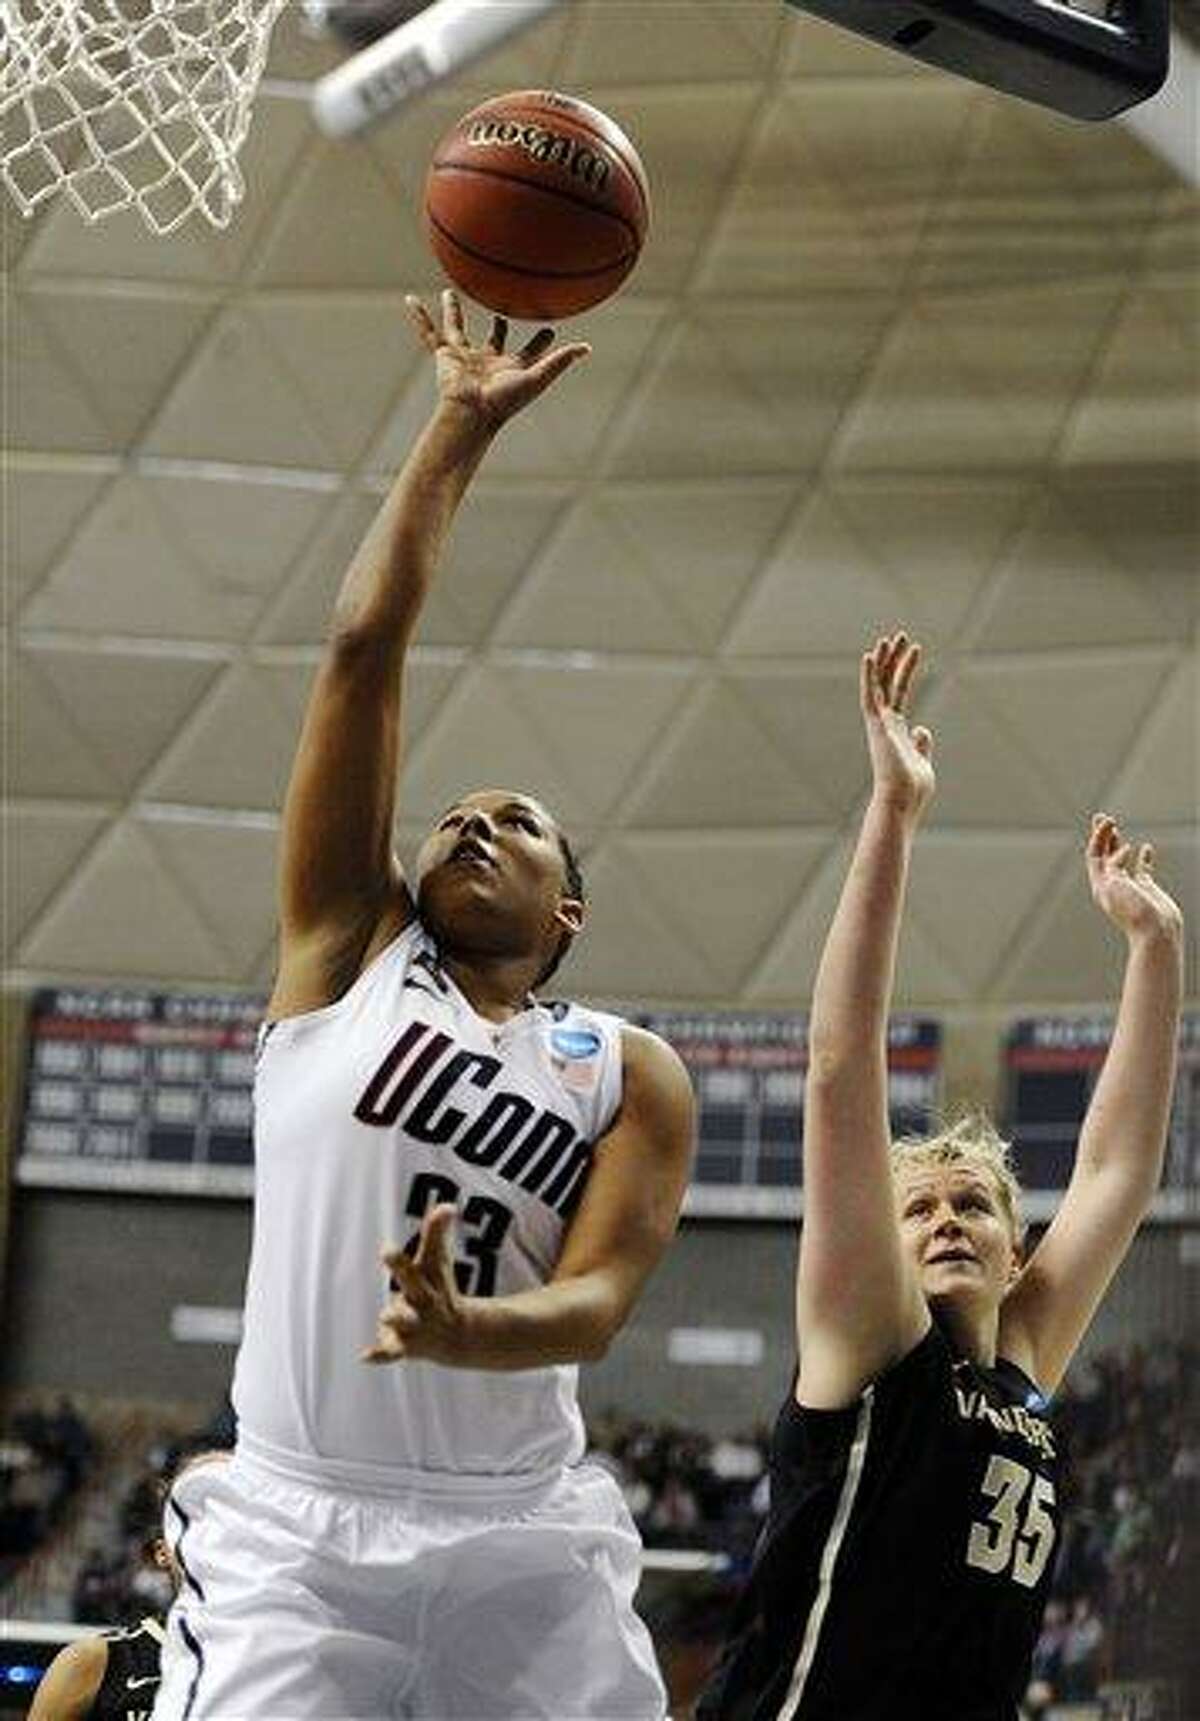 Connecticut's Kaleena Mosqueda-Lewis goes up for a basket while guarded by Vanderbilt's Kendall Shaw in the first half of a second-round game in the women's NCAA college basketball tournament in Storrs, Conn., Monday, March 25, 2013. Connecticut won 77-44. (AP Photo/Jessica Hill)